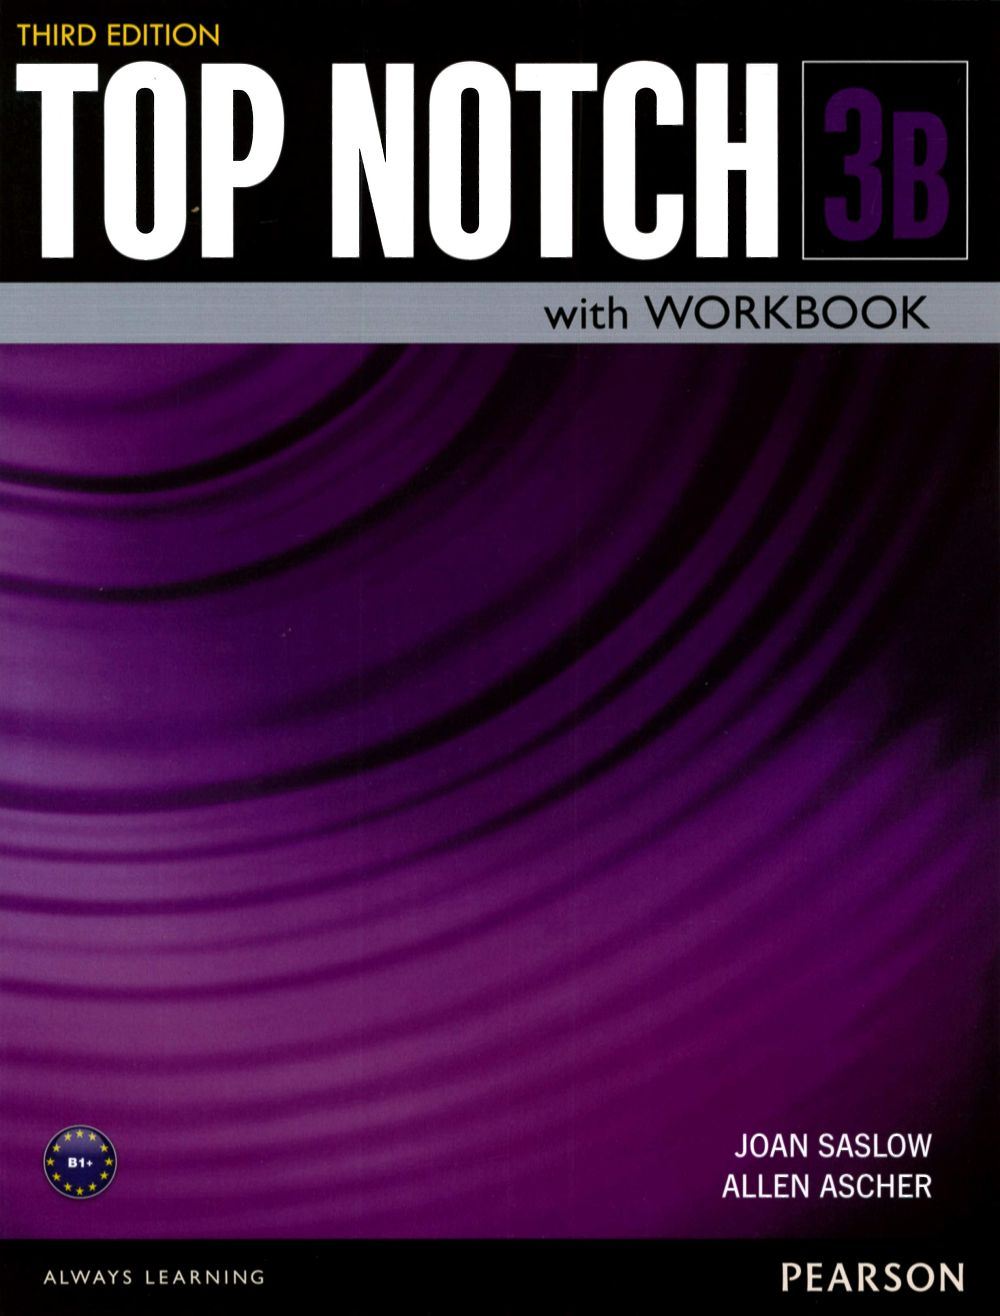 Top Notch 3/e (3B) Student’s Book with Workbook and MP3 CD/1片